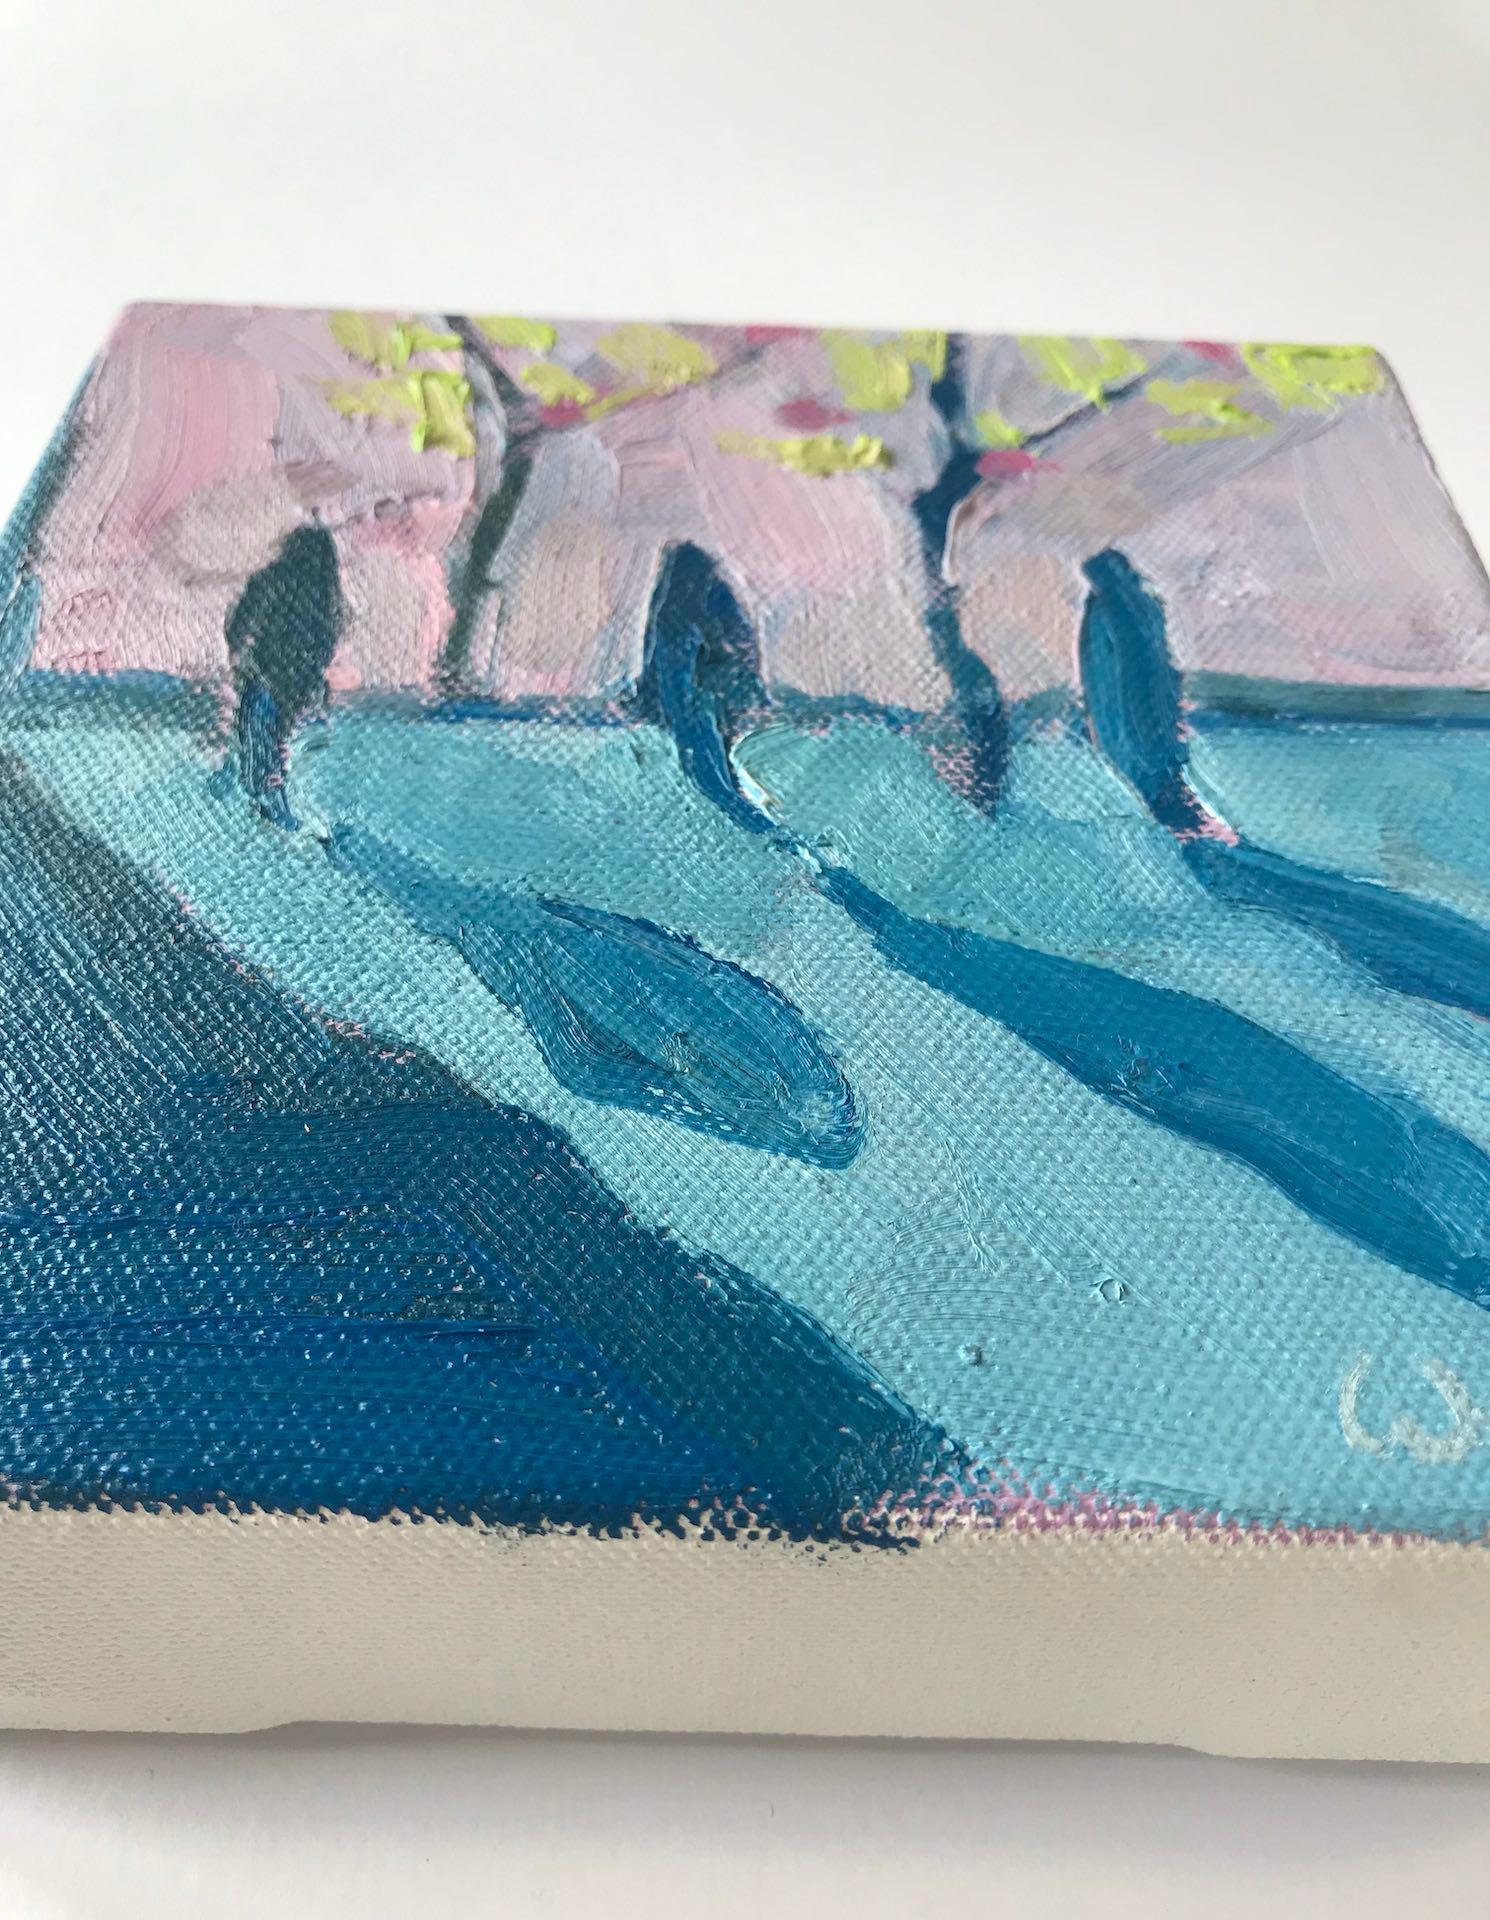 Eleanor Woolley
Winter Shadows 13
Original Landscape Painting
Oil Paint on Canvas
Board Size: H 15cm x W 15cm x D 4cm
Sold Unframed
Ready to Hang
Please note that insitu images are purely an indication of how a piece may look.

Winter shadows 13 is